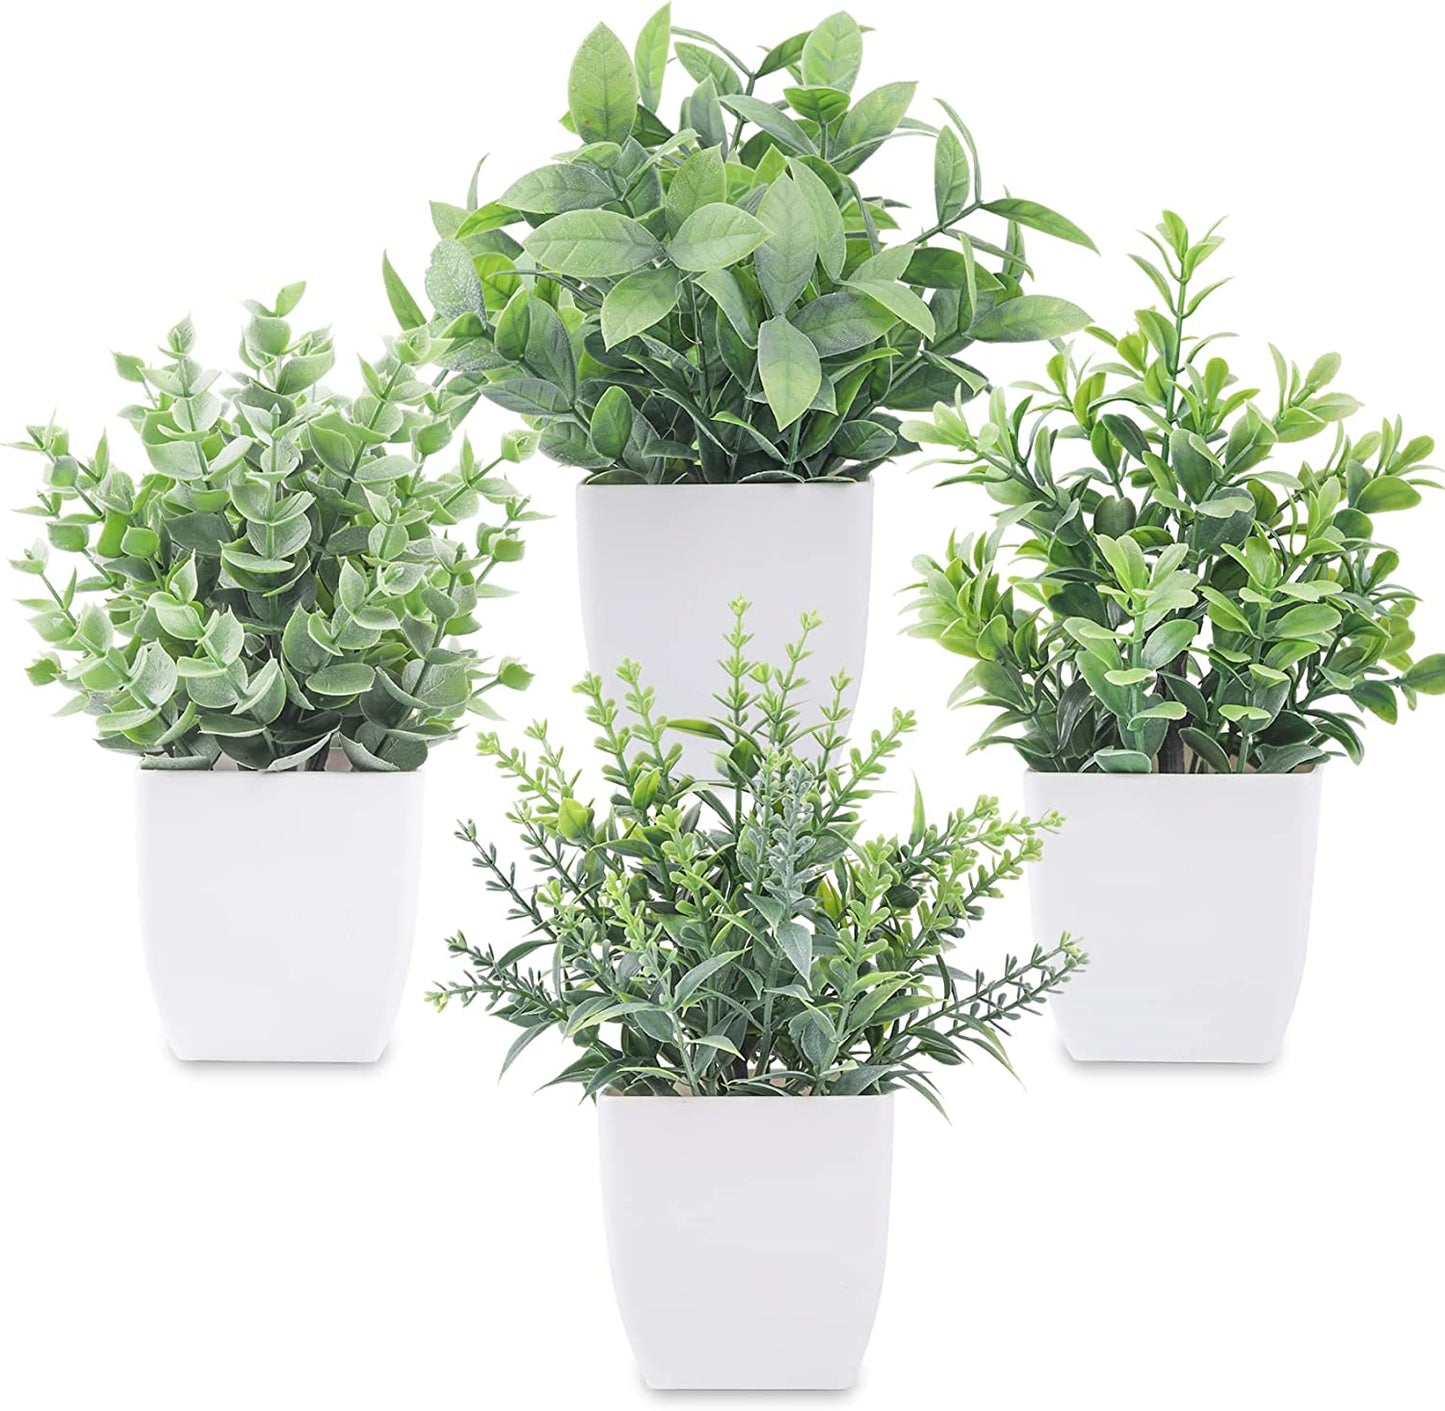 4 Packs Fake Plants Mini Artificial Greenery Potted Plants for Home Decor Indoor Office Table Room Farmhouse